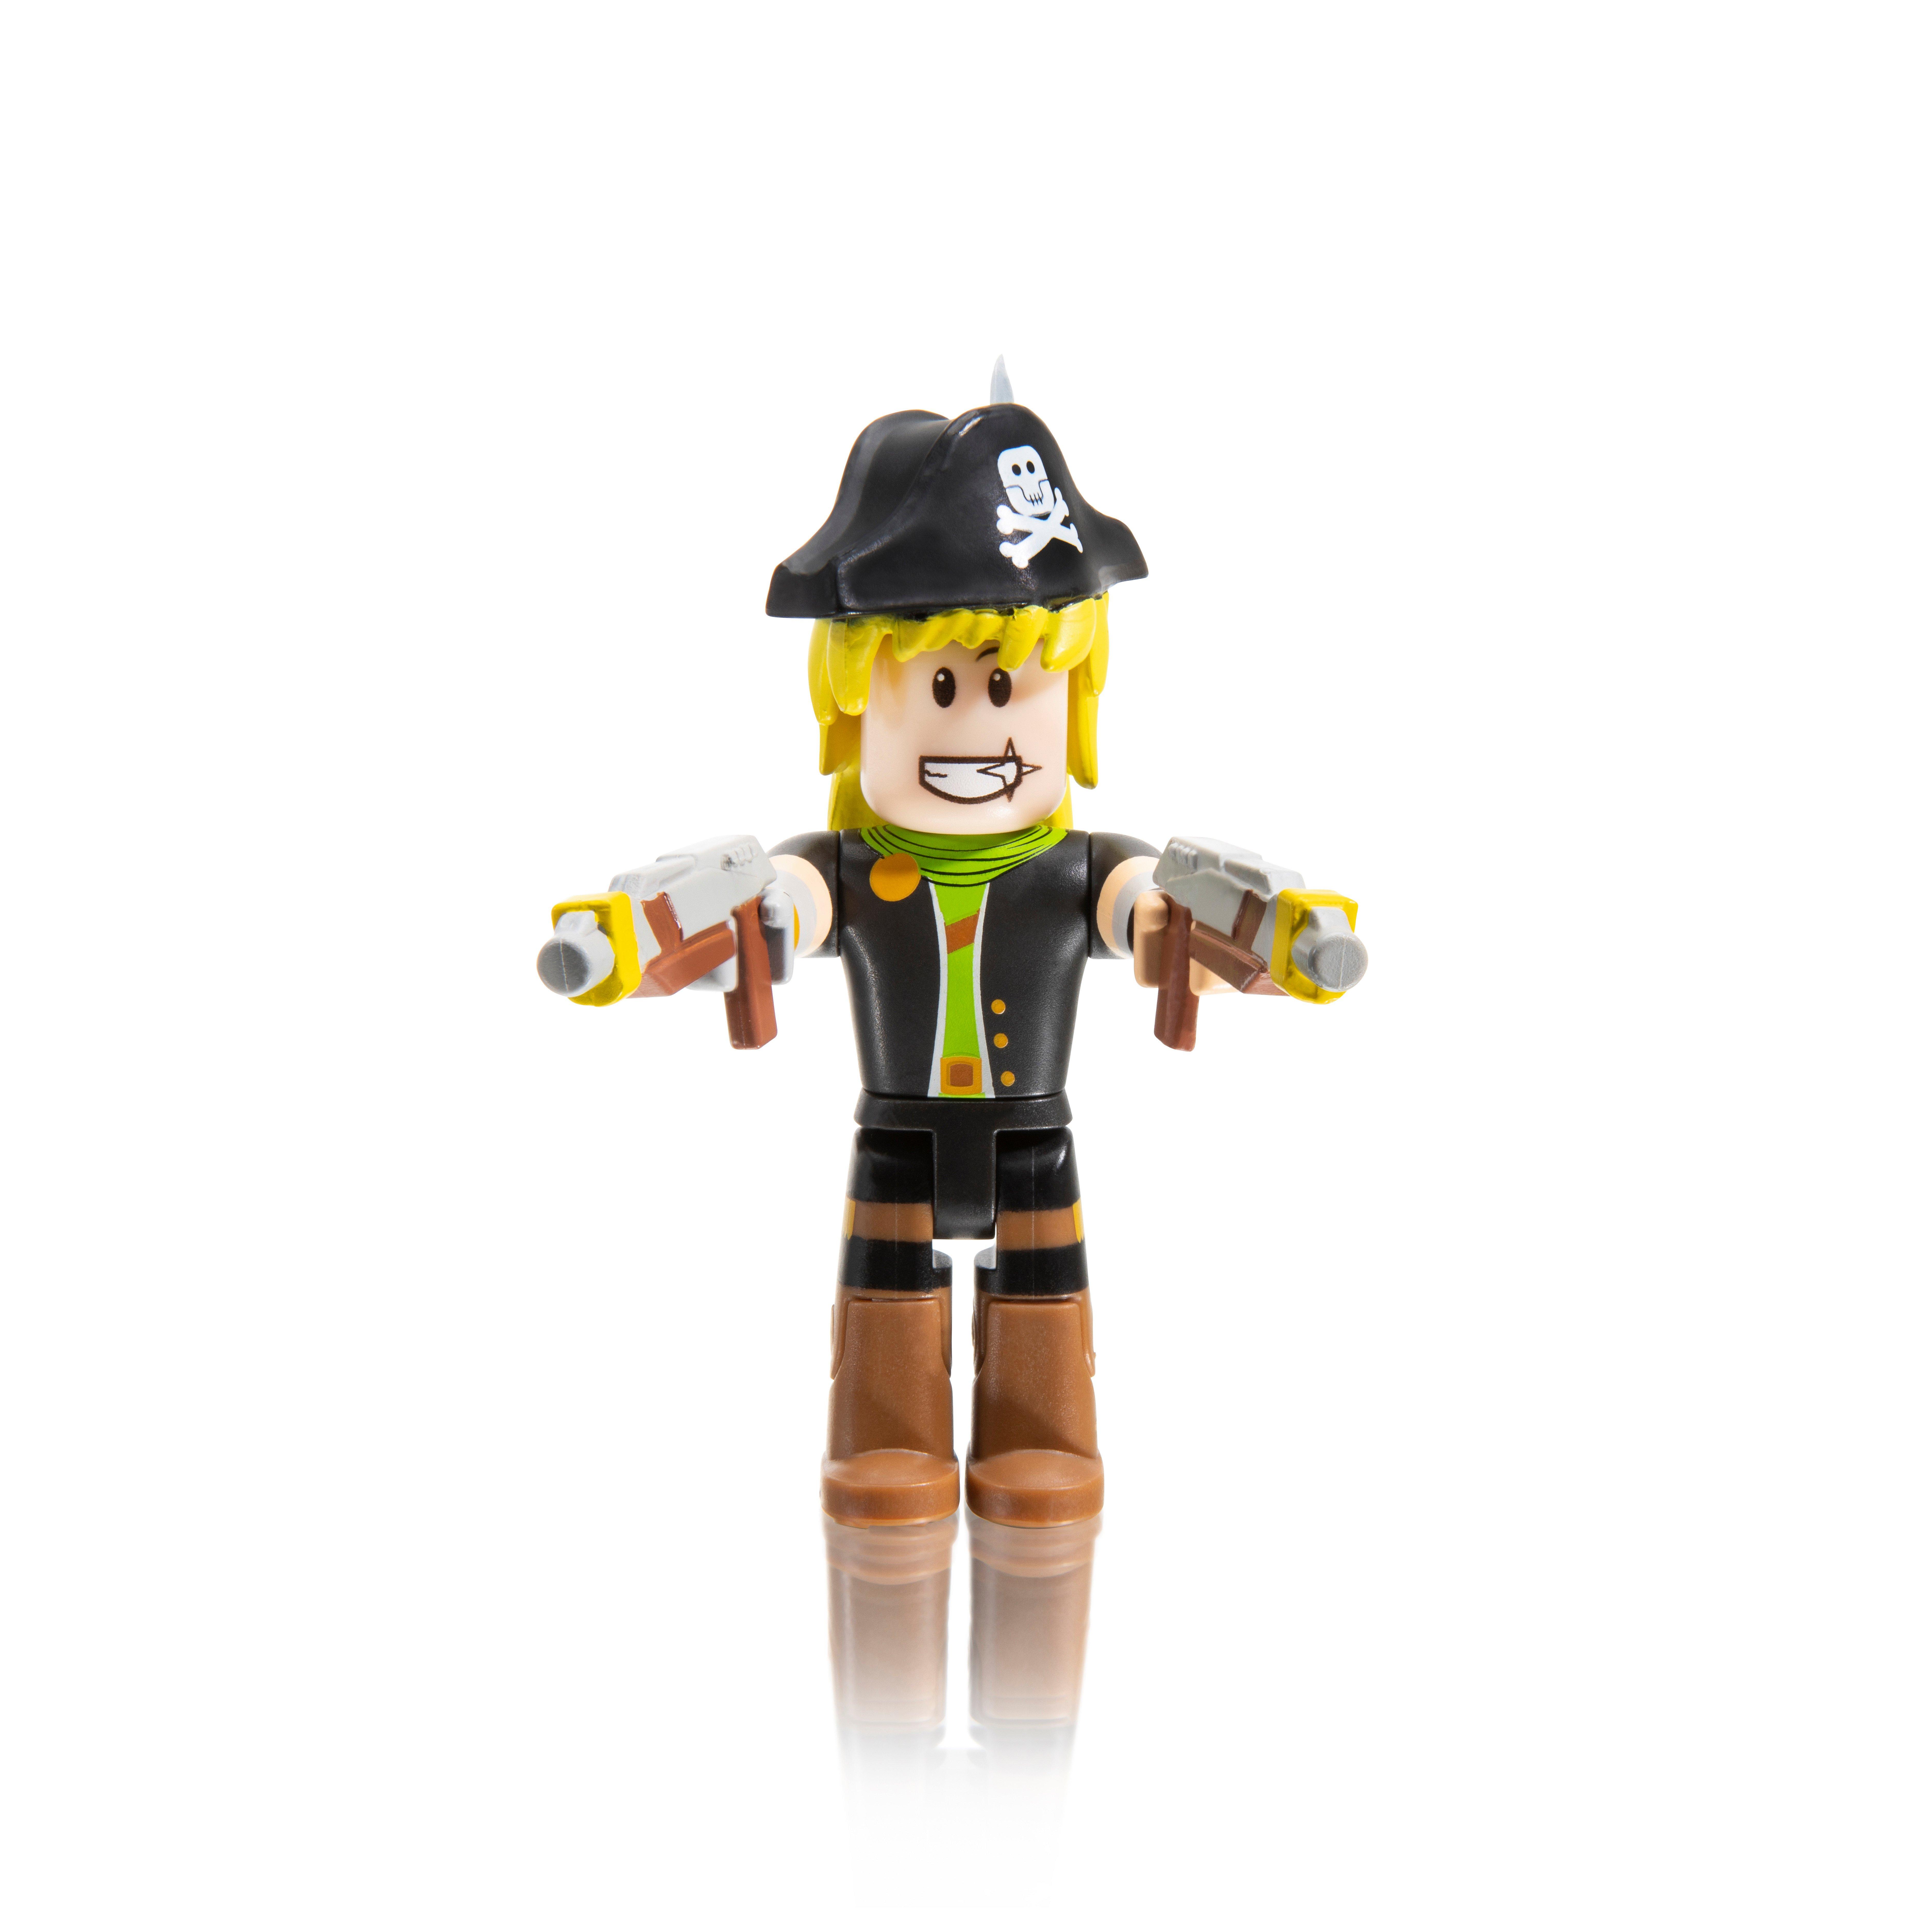 Roblox Action Collection Series 7 Mystery Figure Includes 1 Figure And Exclusive Virtual Item Gamestop - virtual hat roblox